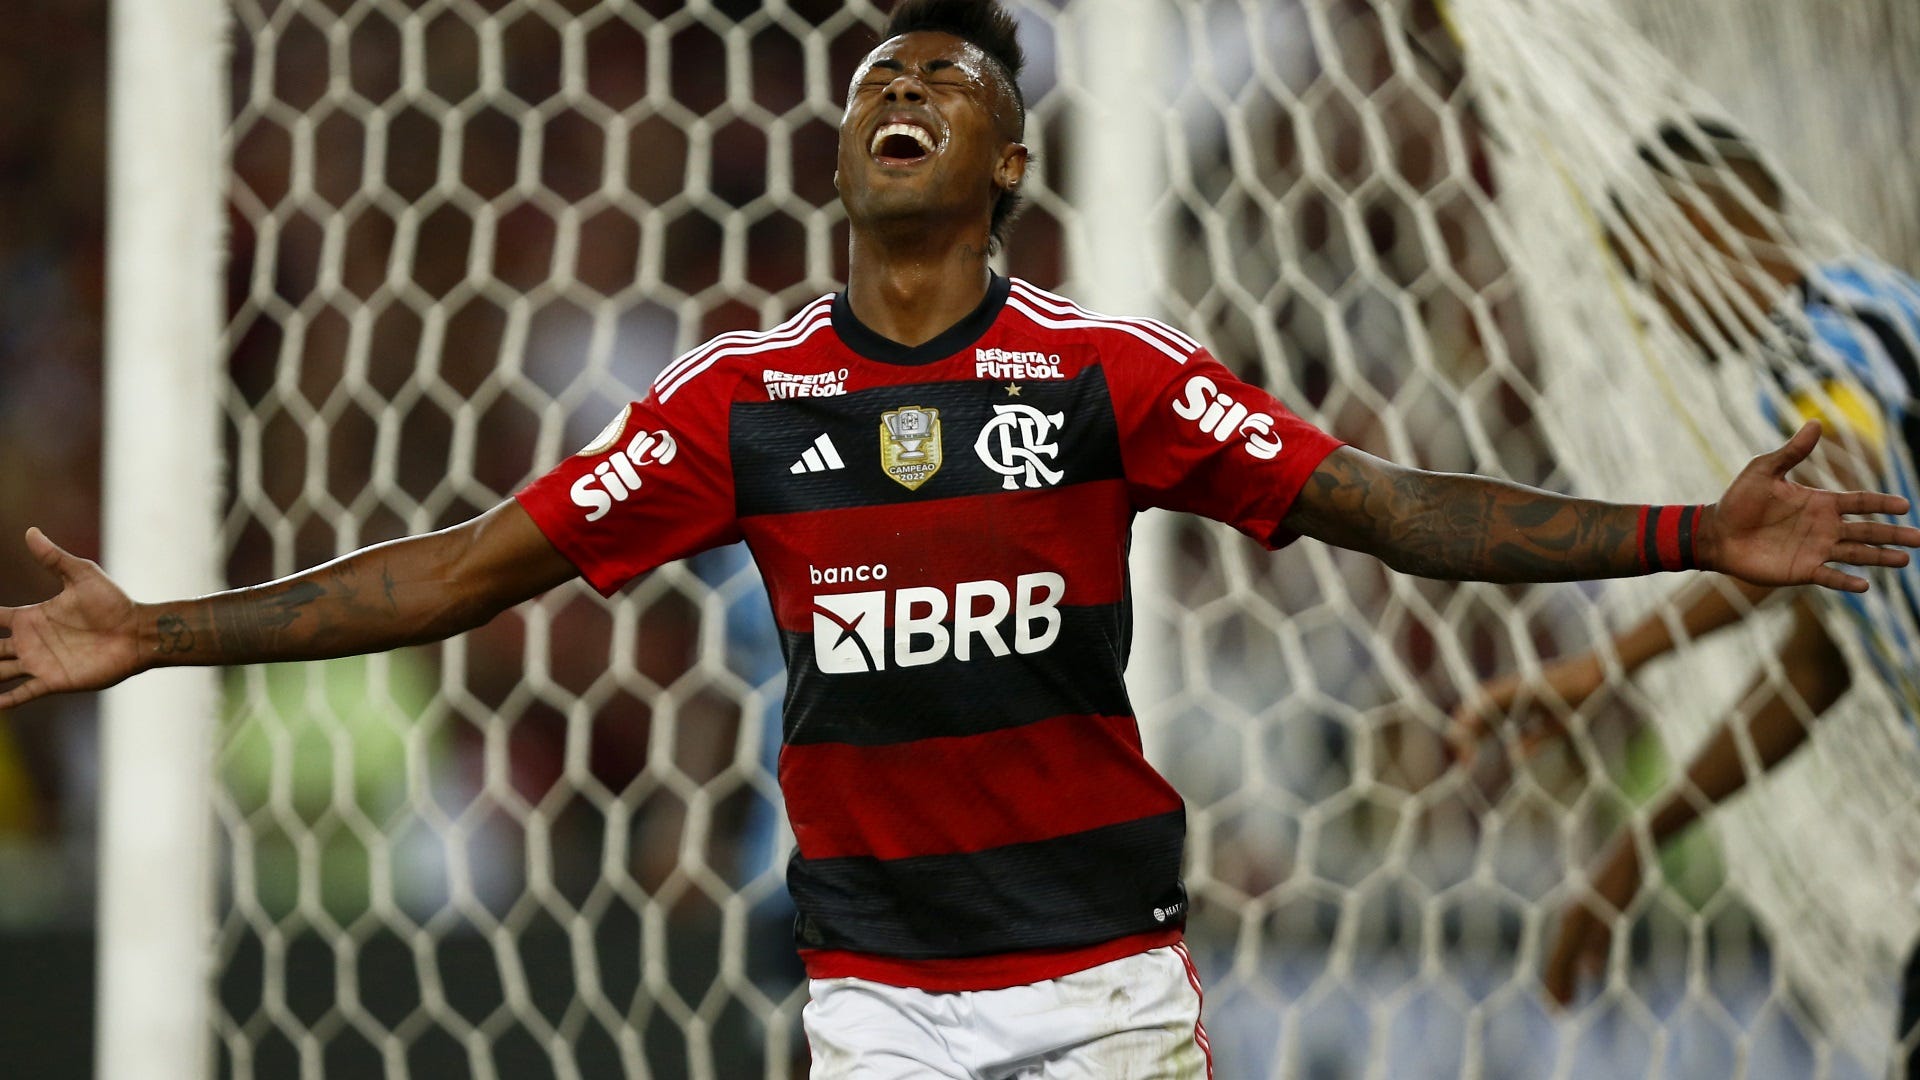 Paranaense vs Flamengo Live stream, TV channel, kick-off time and where to watch Goal US